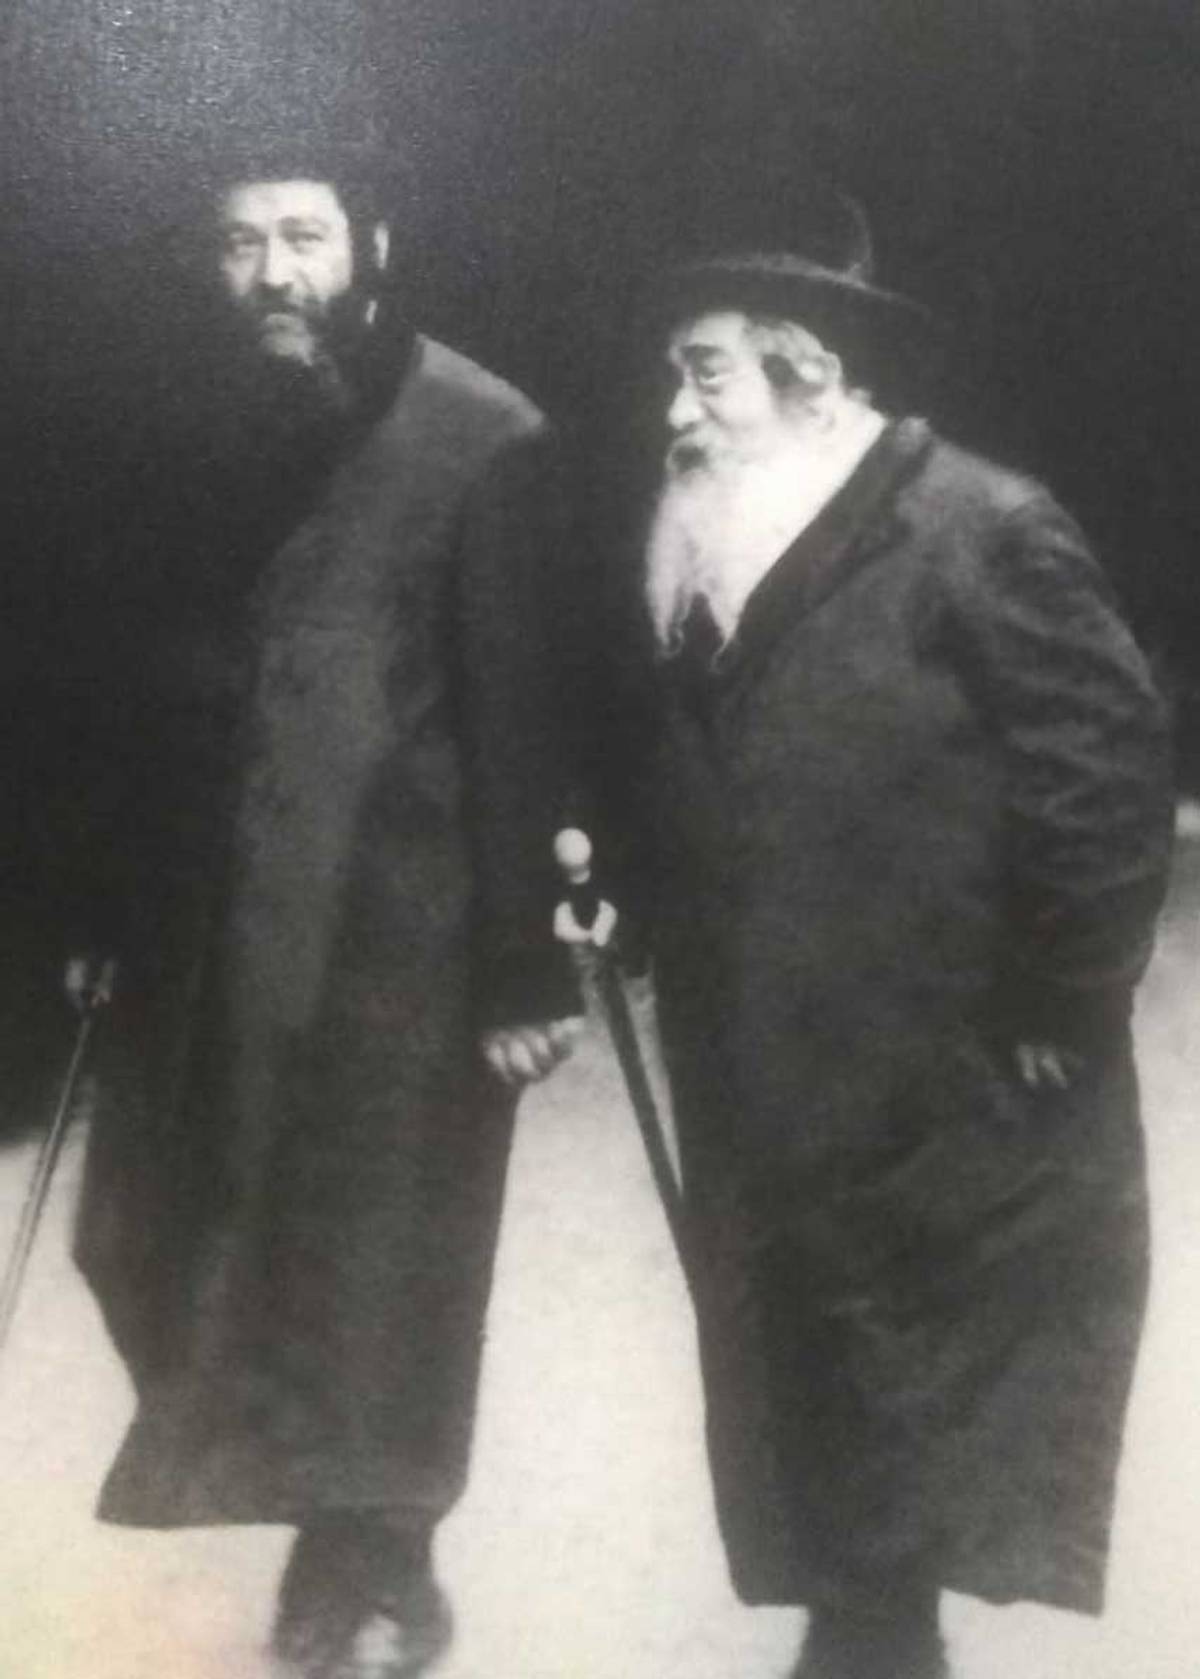 Reb Alter Yisrael Shimon Perlow, also known as the Tiferes Ish, at right, with Rabbi Meir Shapiro, circa 1929